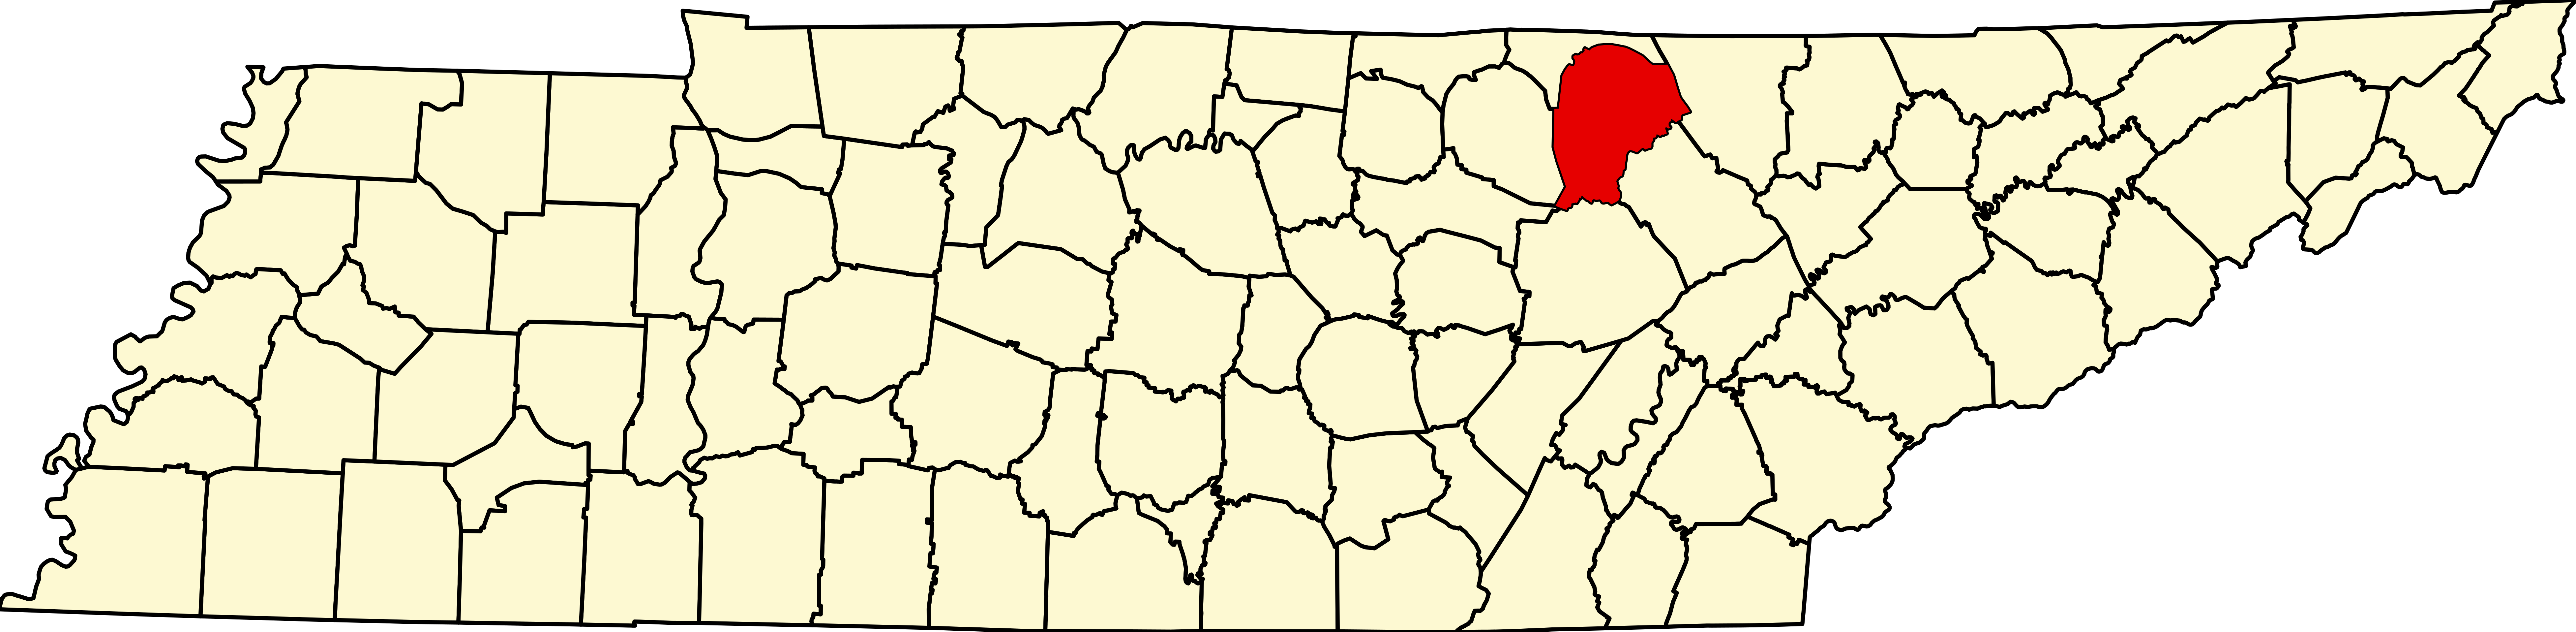 upload.wikimedia.org/wikipedia/commons/thumb/8/80/Map_of_Tennessee_highlighting_Fentress_County.svg/7814px-Map_of_Tennessee_highlighting_Fentress_County.svg.png